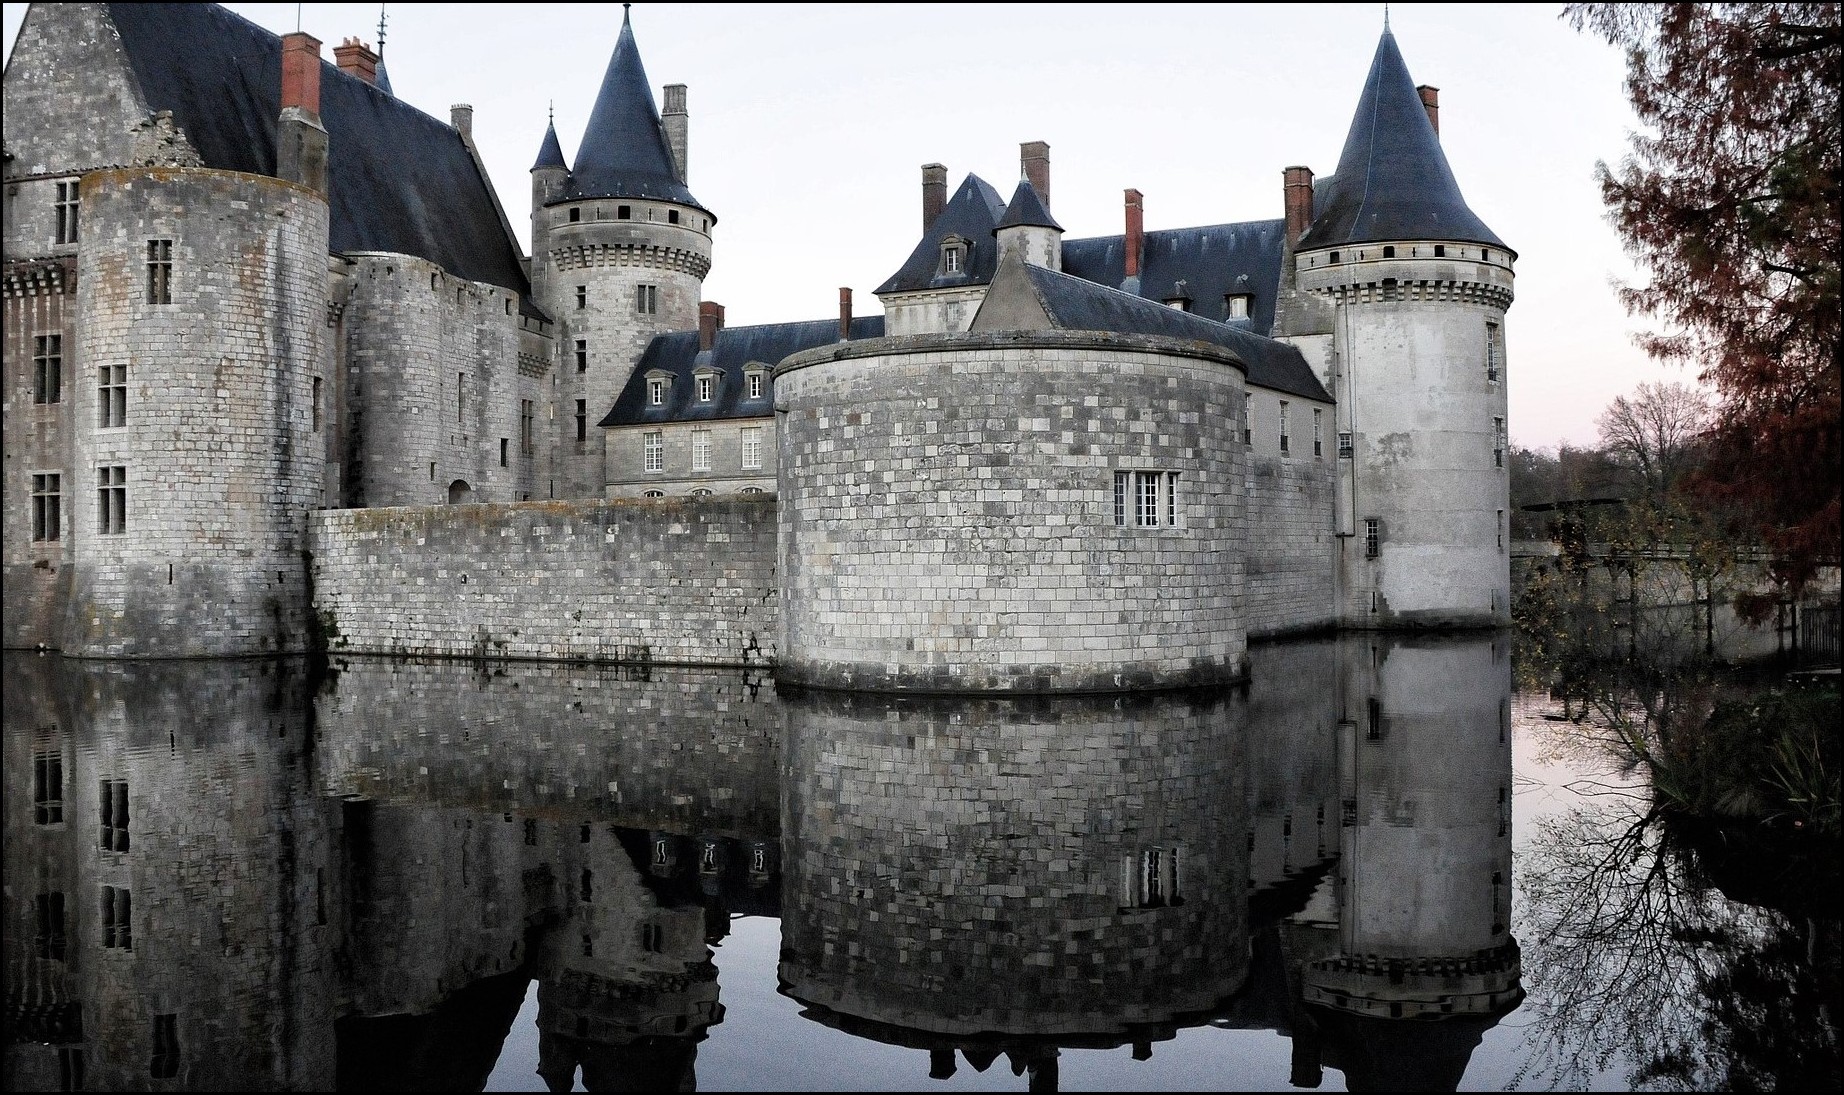 A Castle Moat is a Great Defense---How's Yours? » The Faithful Wanderer